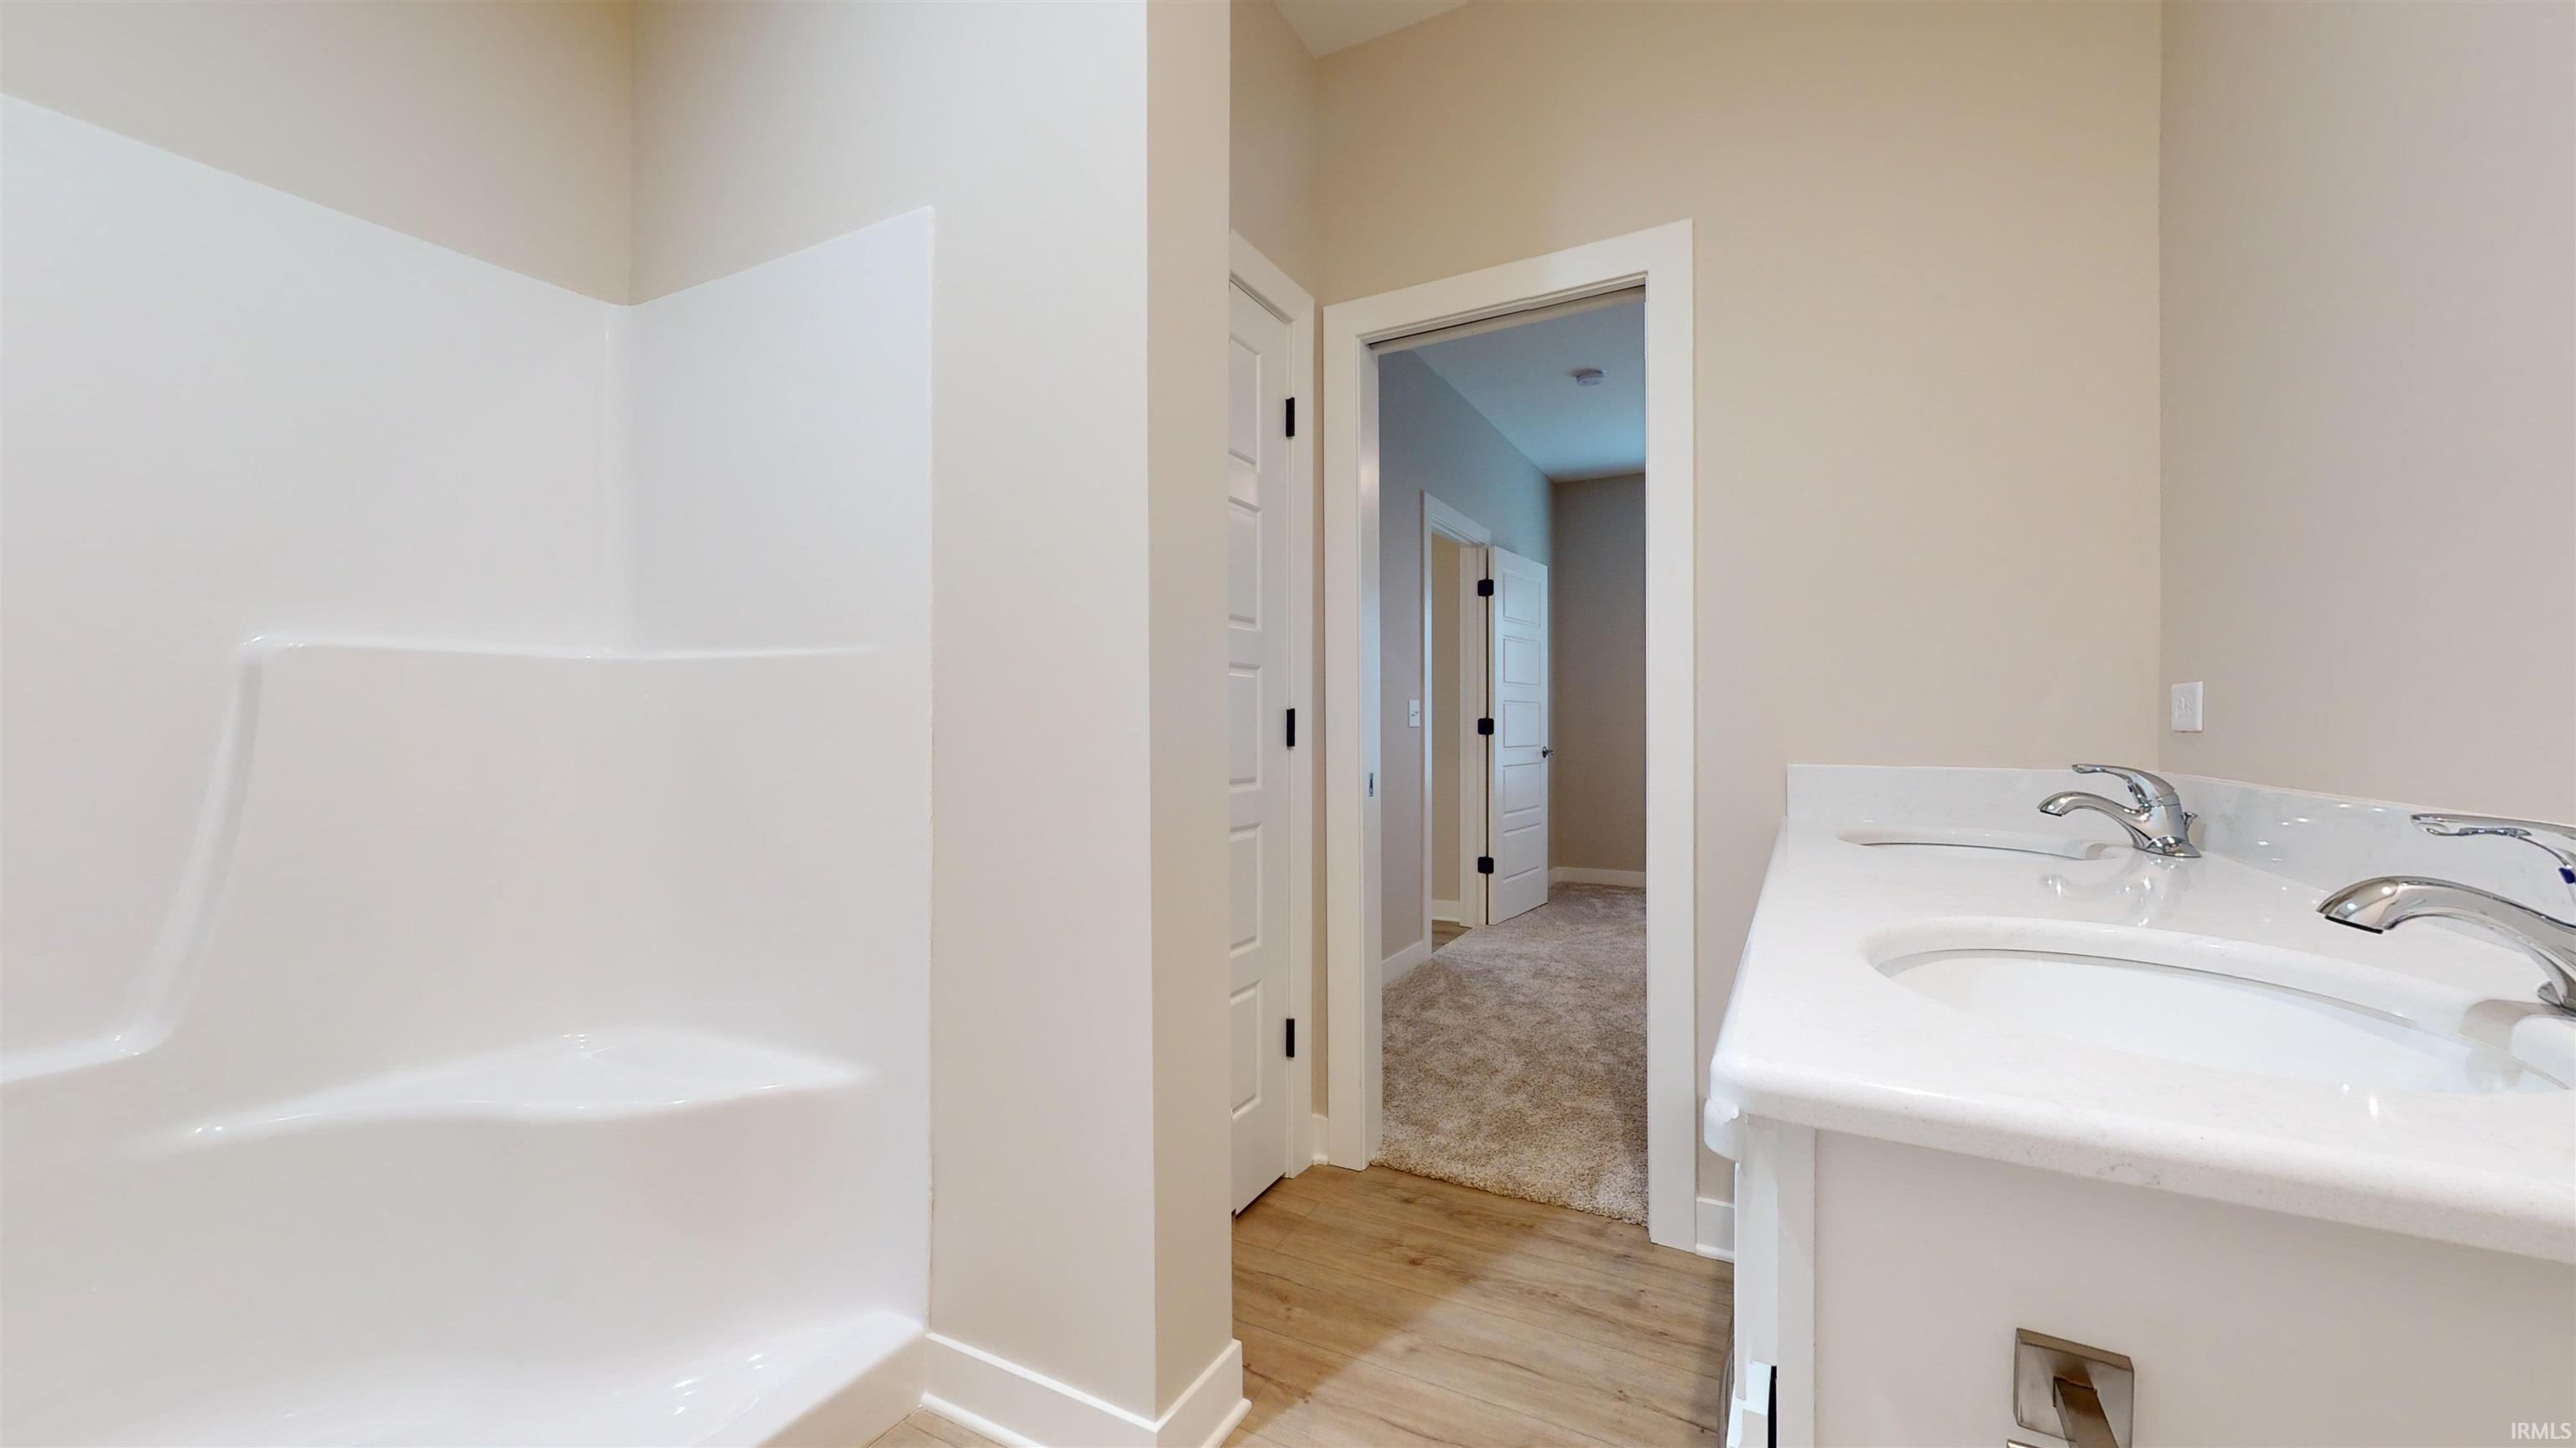 Hall Bath is located between the two bedrooms off of the foyer.